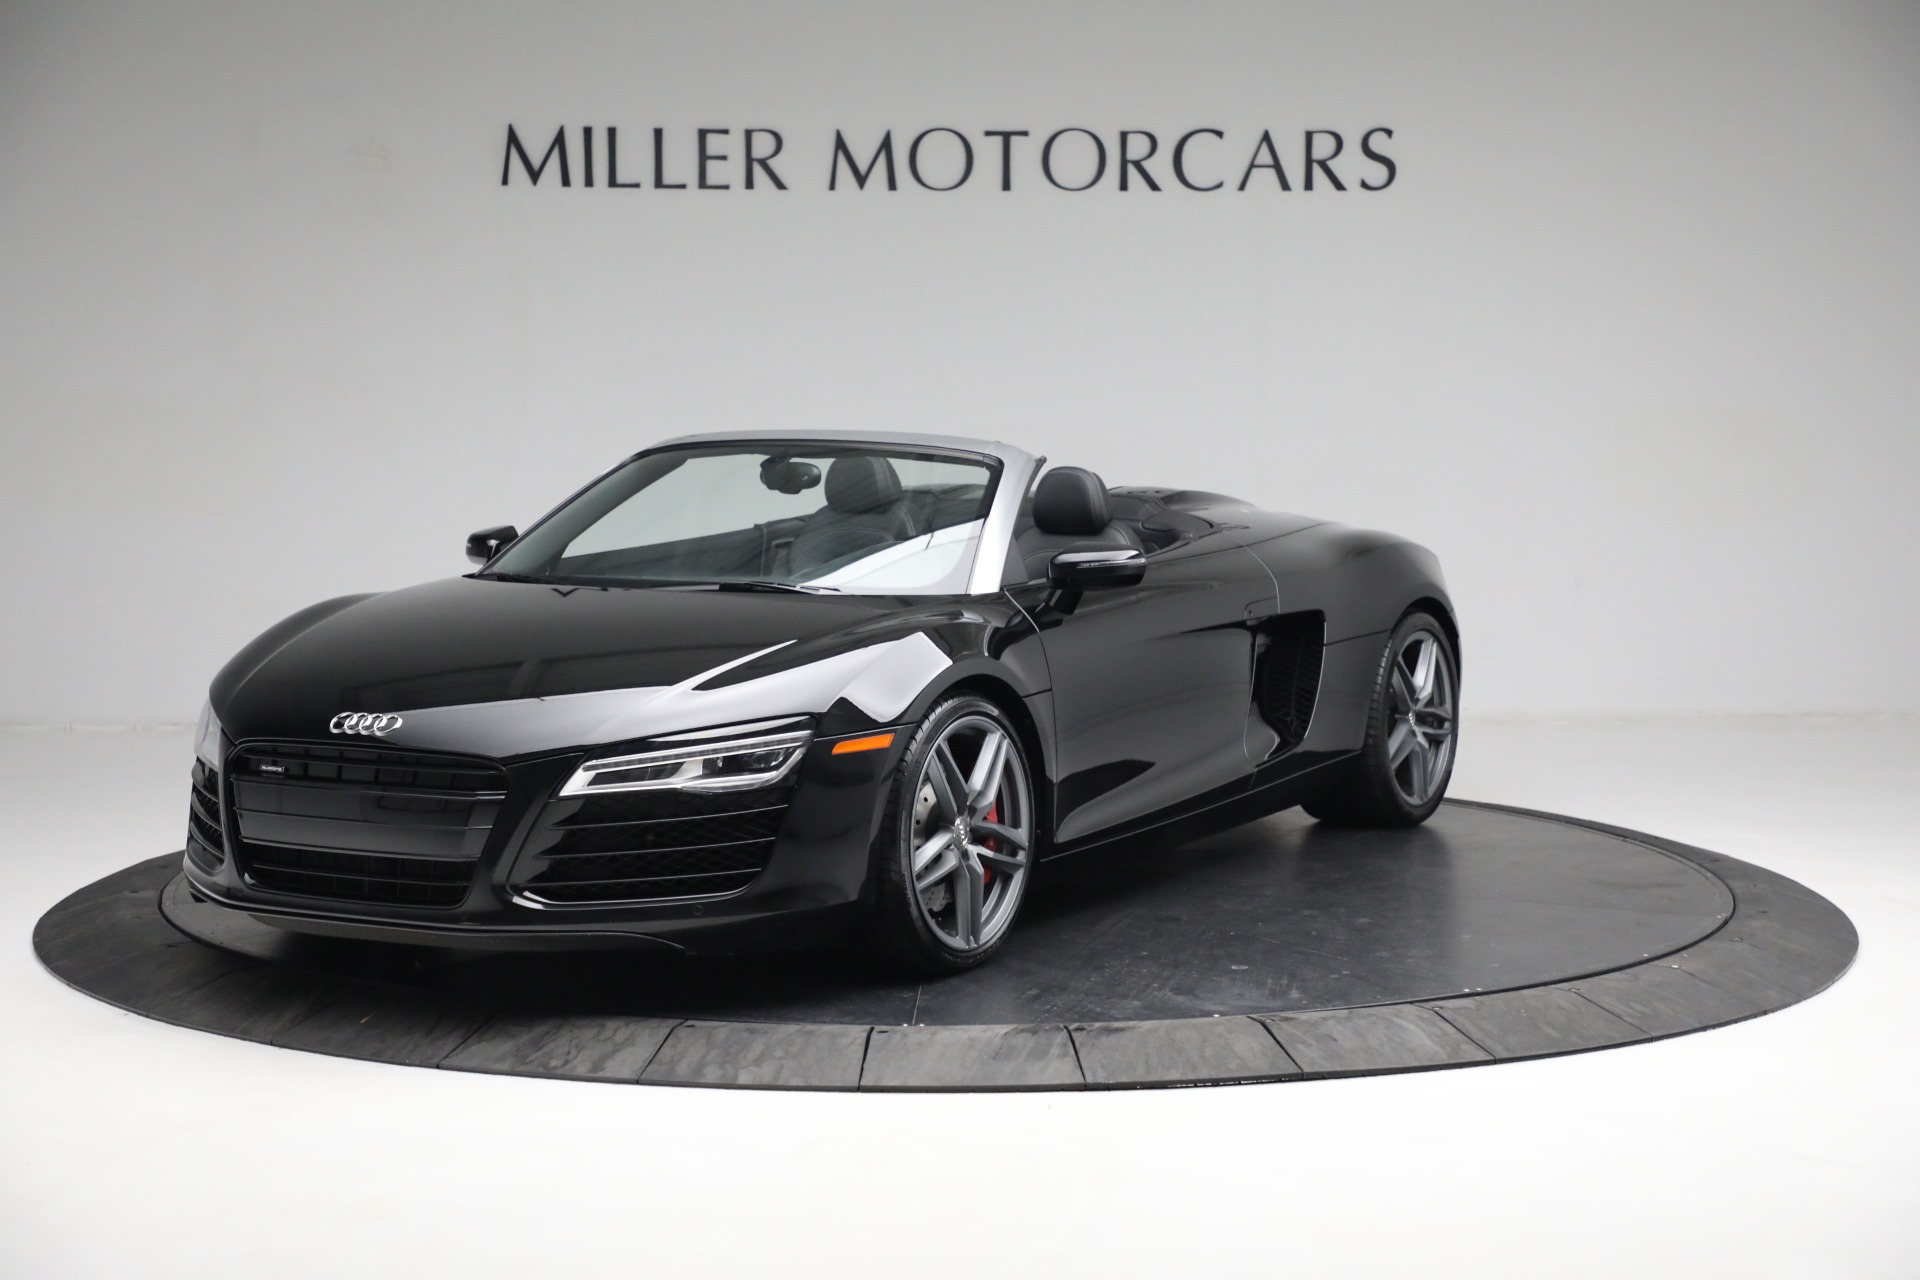 Used 2015 Audi R8 4.2 quattro Spyder for sale $109,900 at Bentley Greenwich in Greenwich CT 06830 1